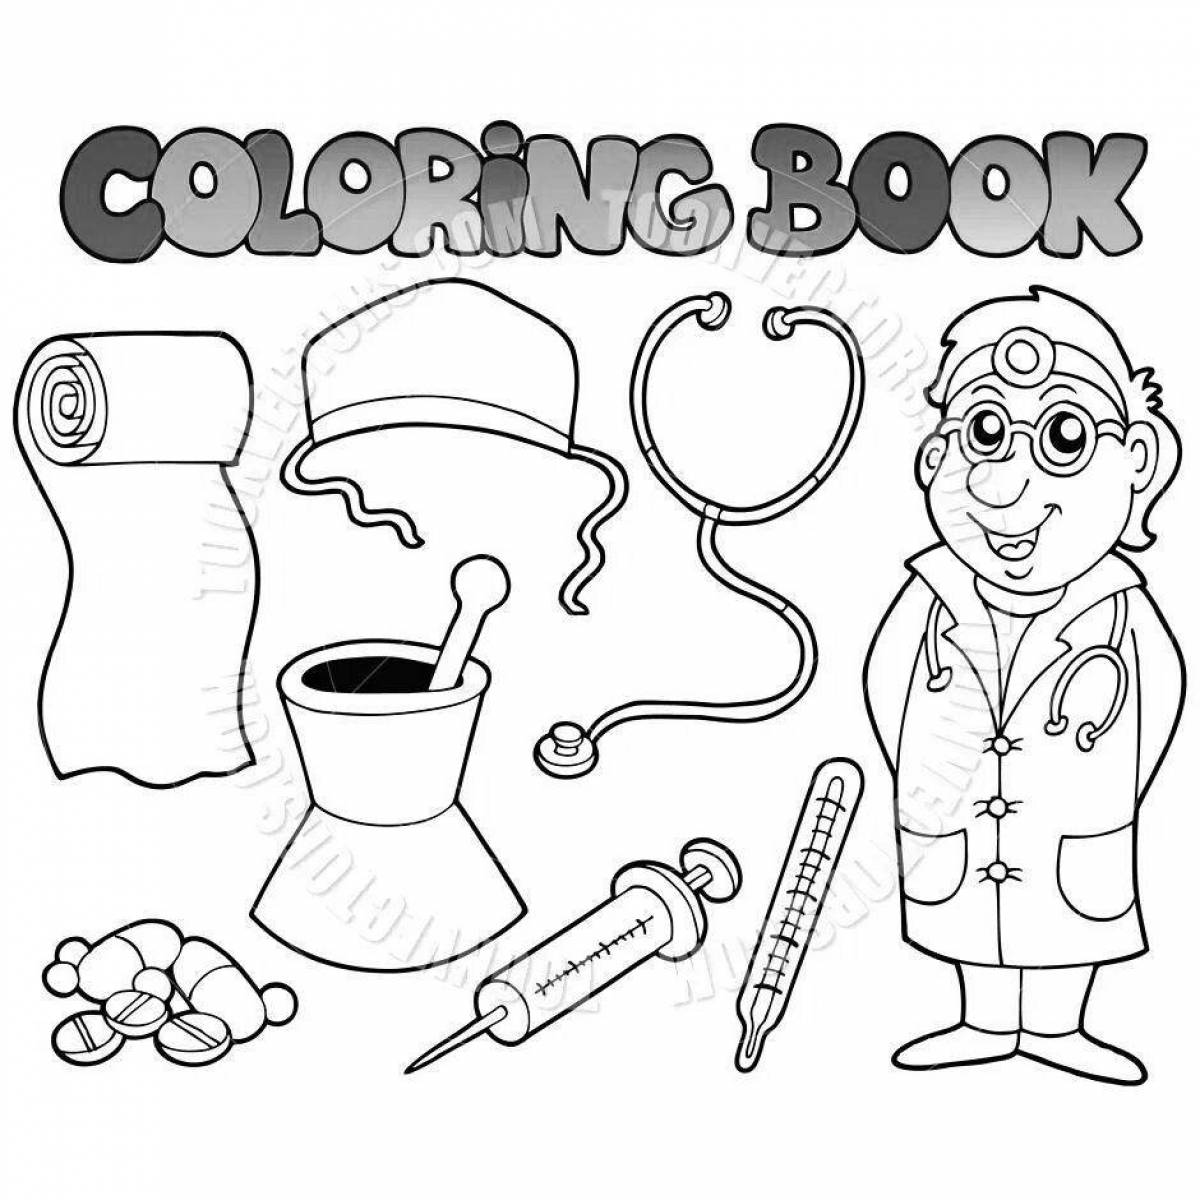 Coloring page charming laura